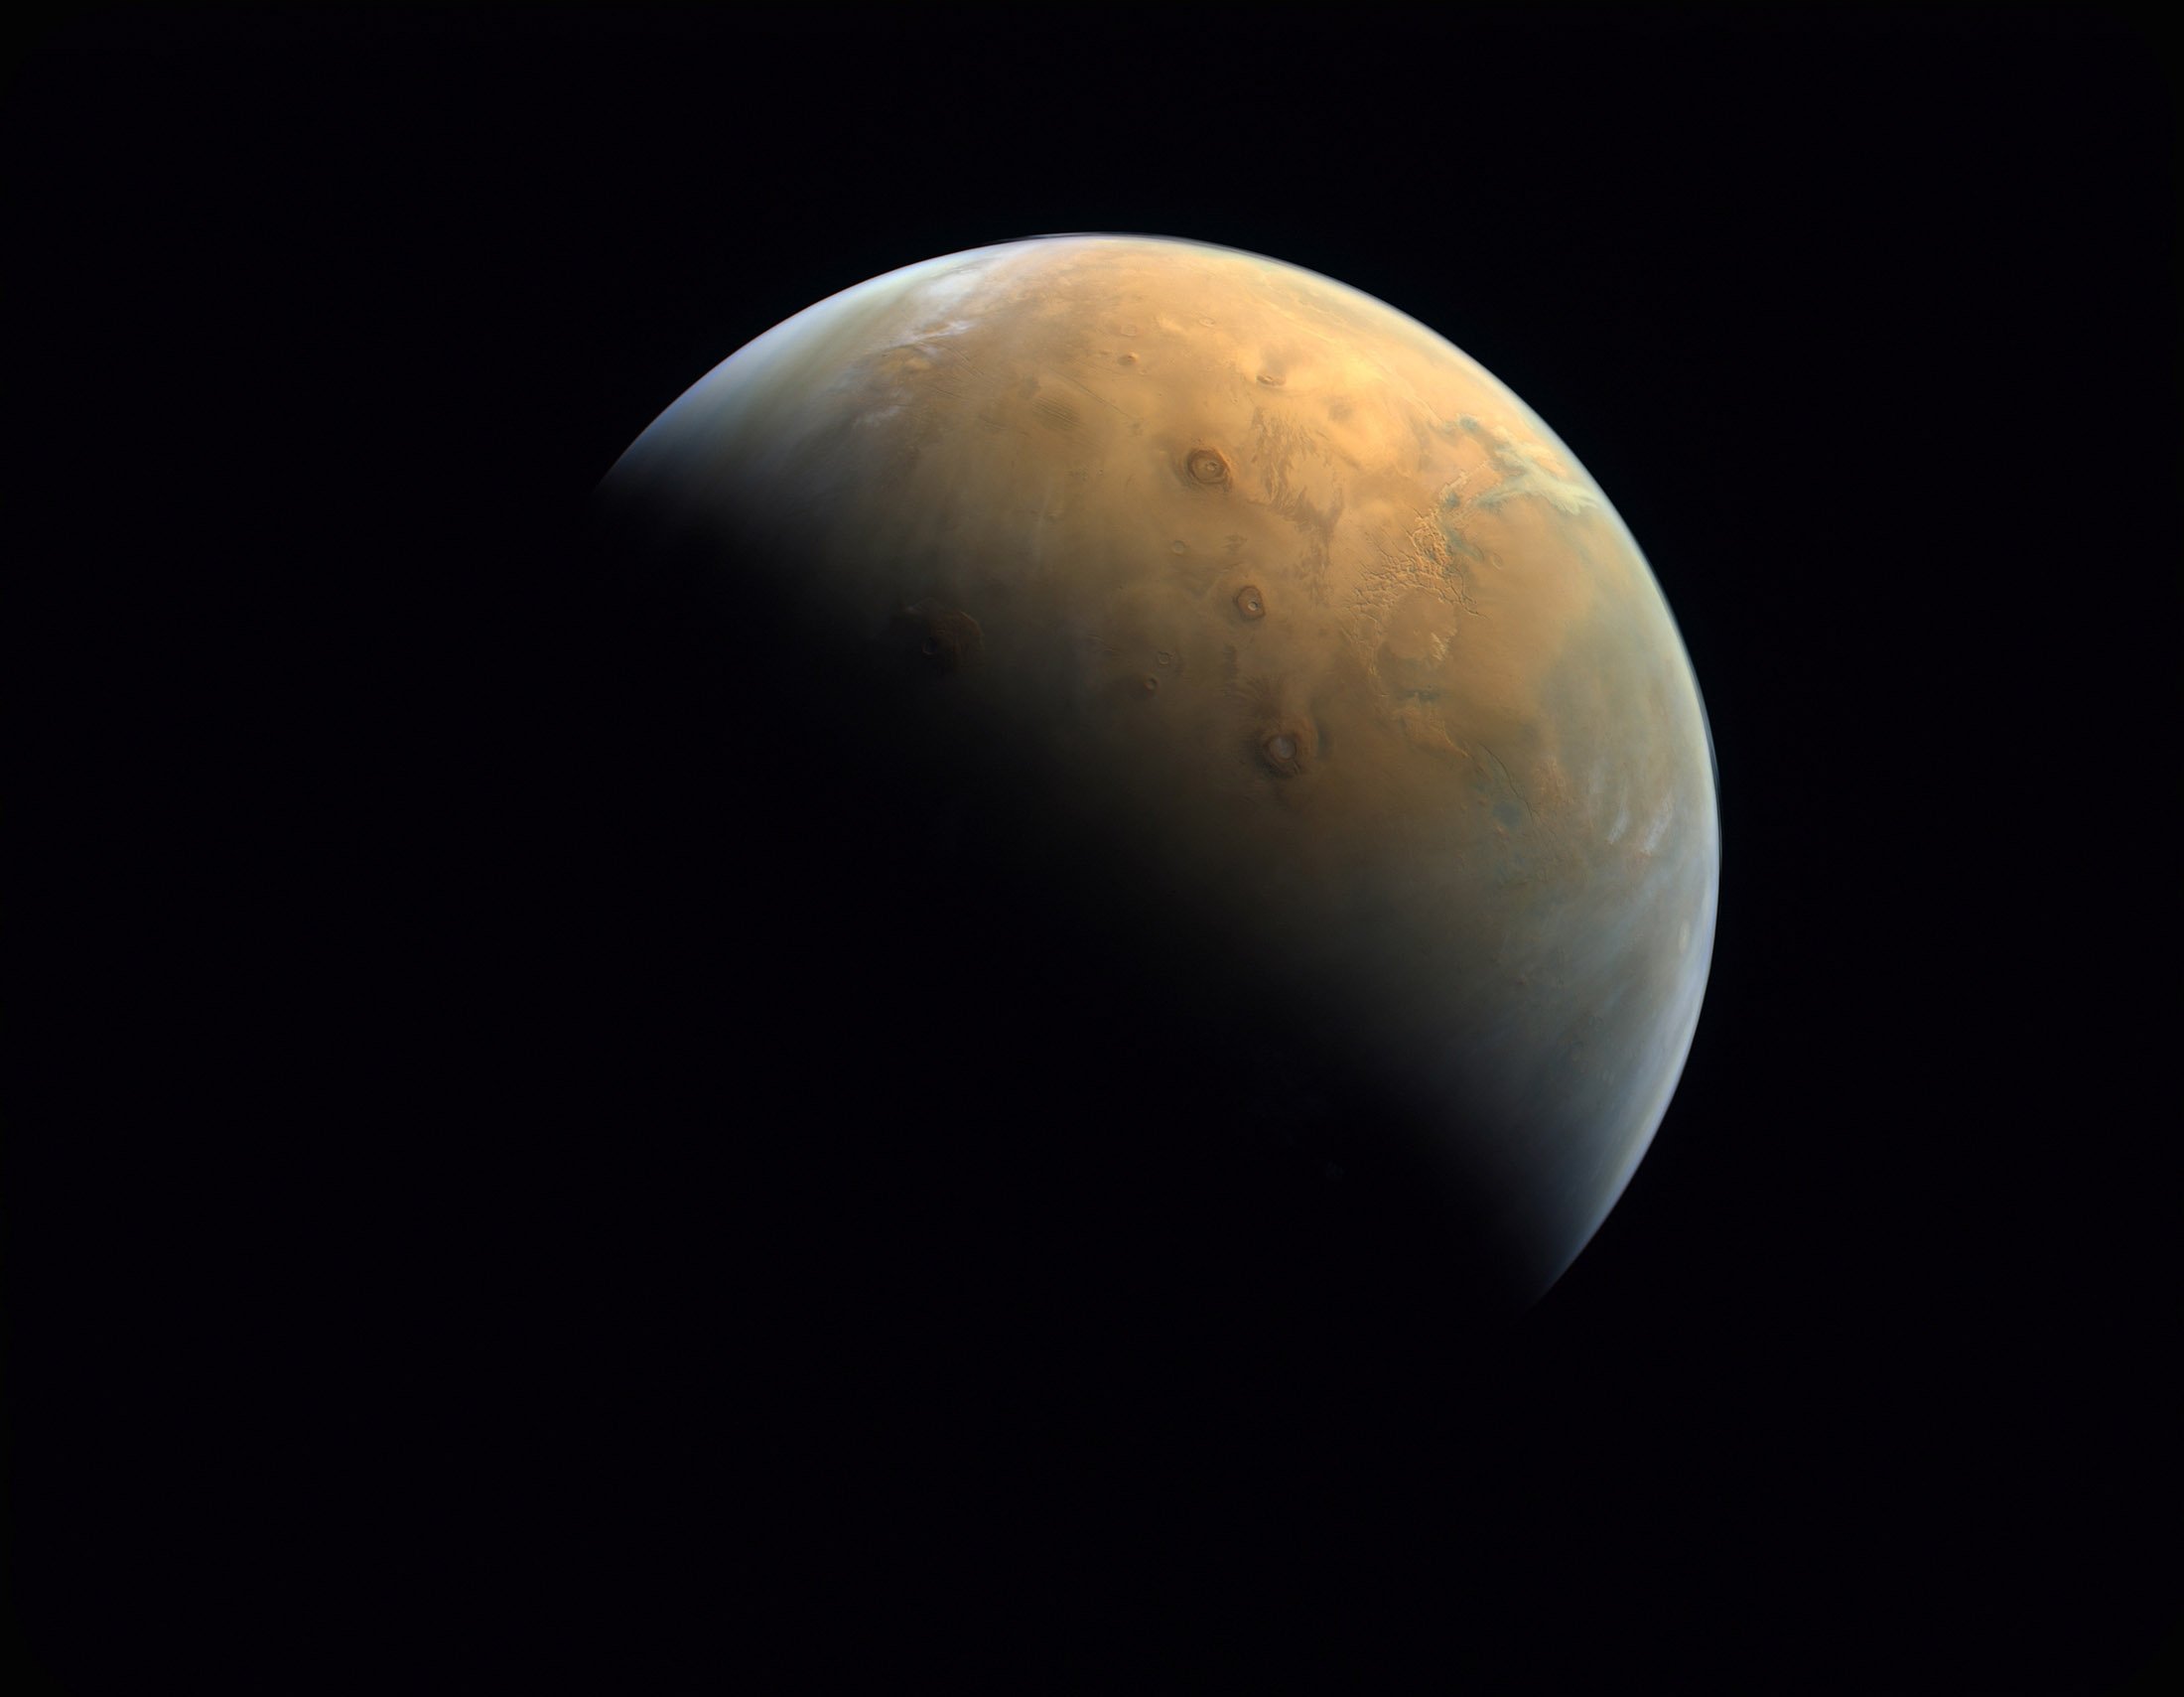 climate on planet mars